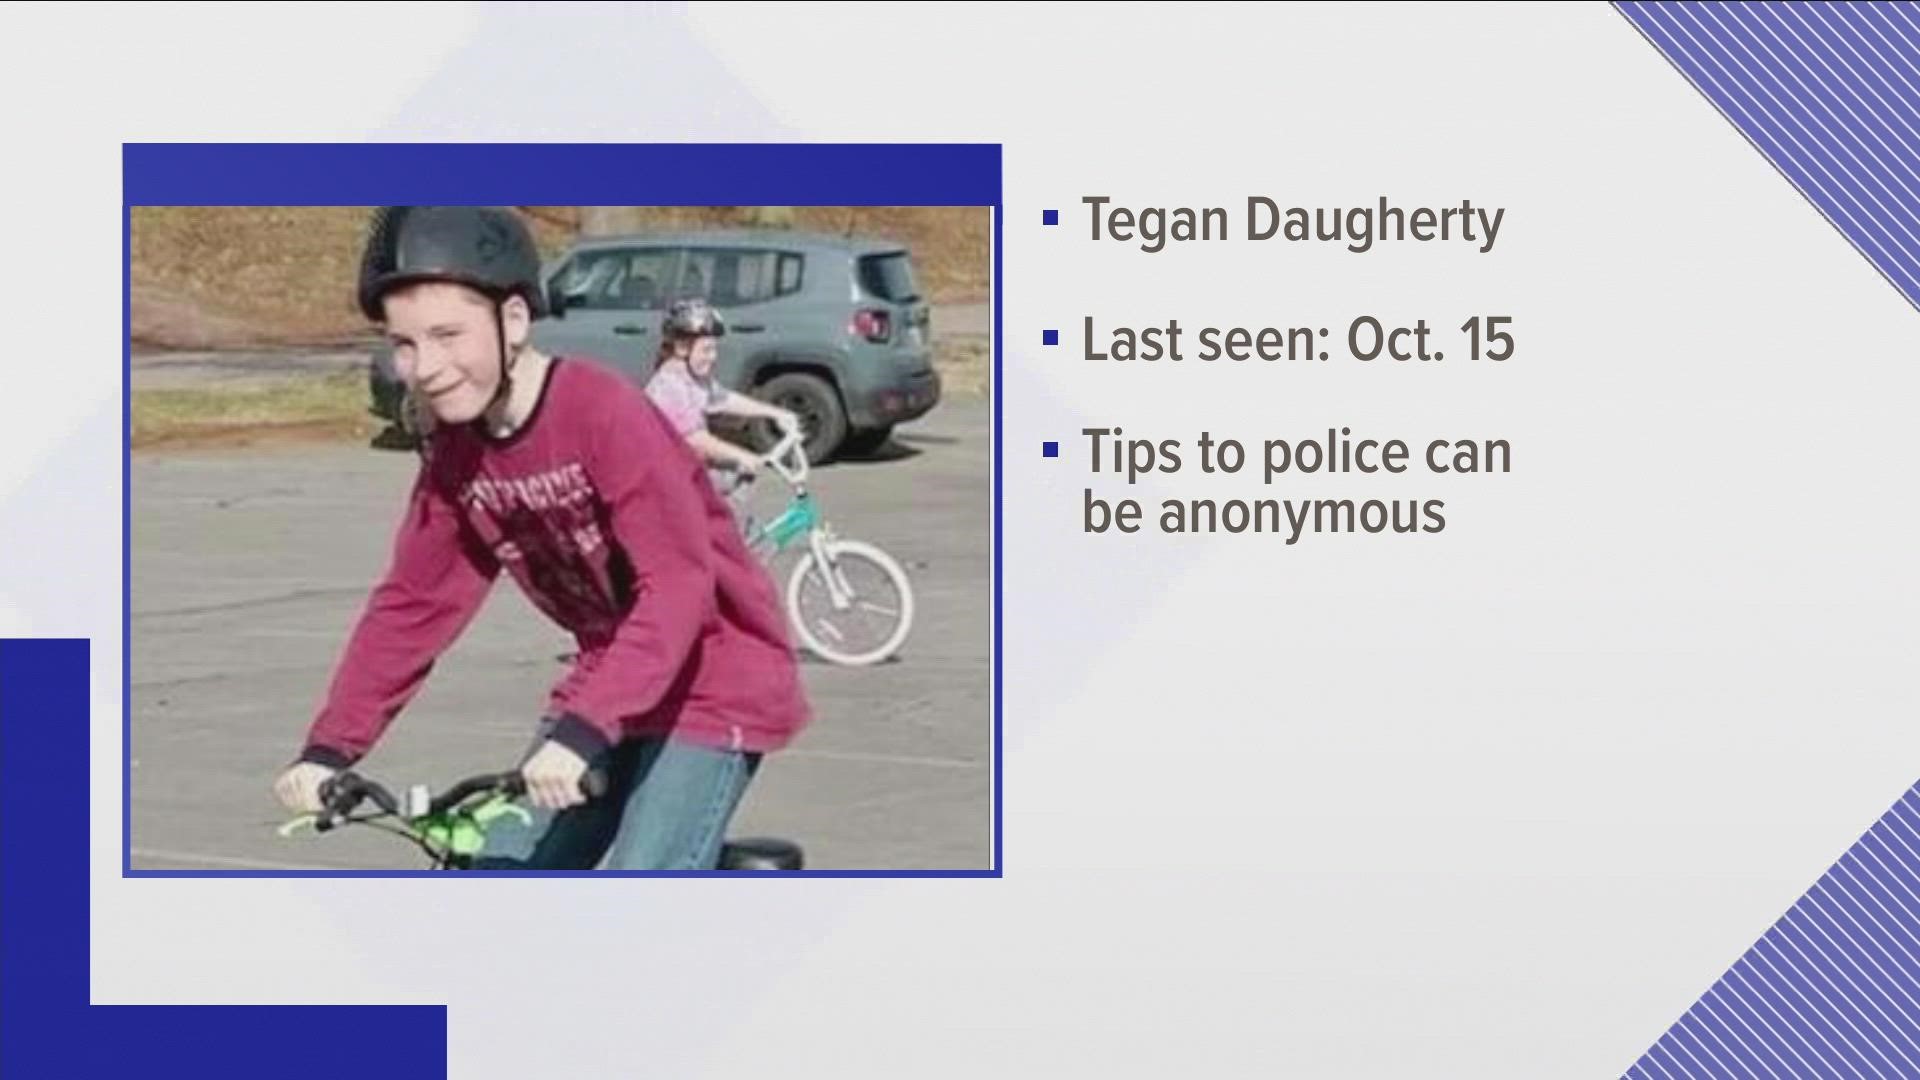 Teagan Daughtery was last seen riding a black bike with green wheels two weeks ago.